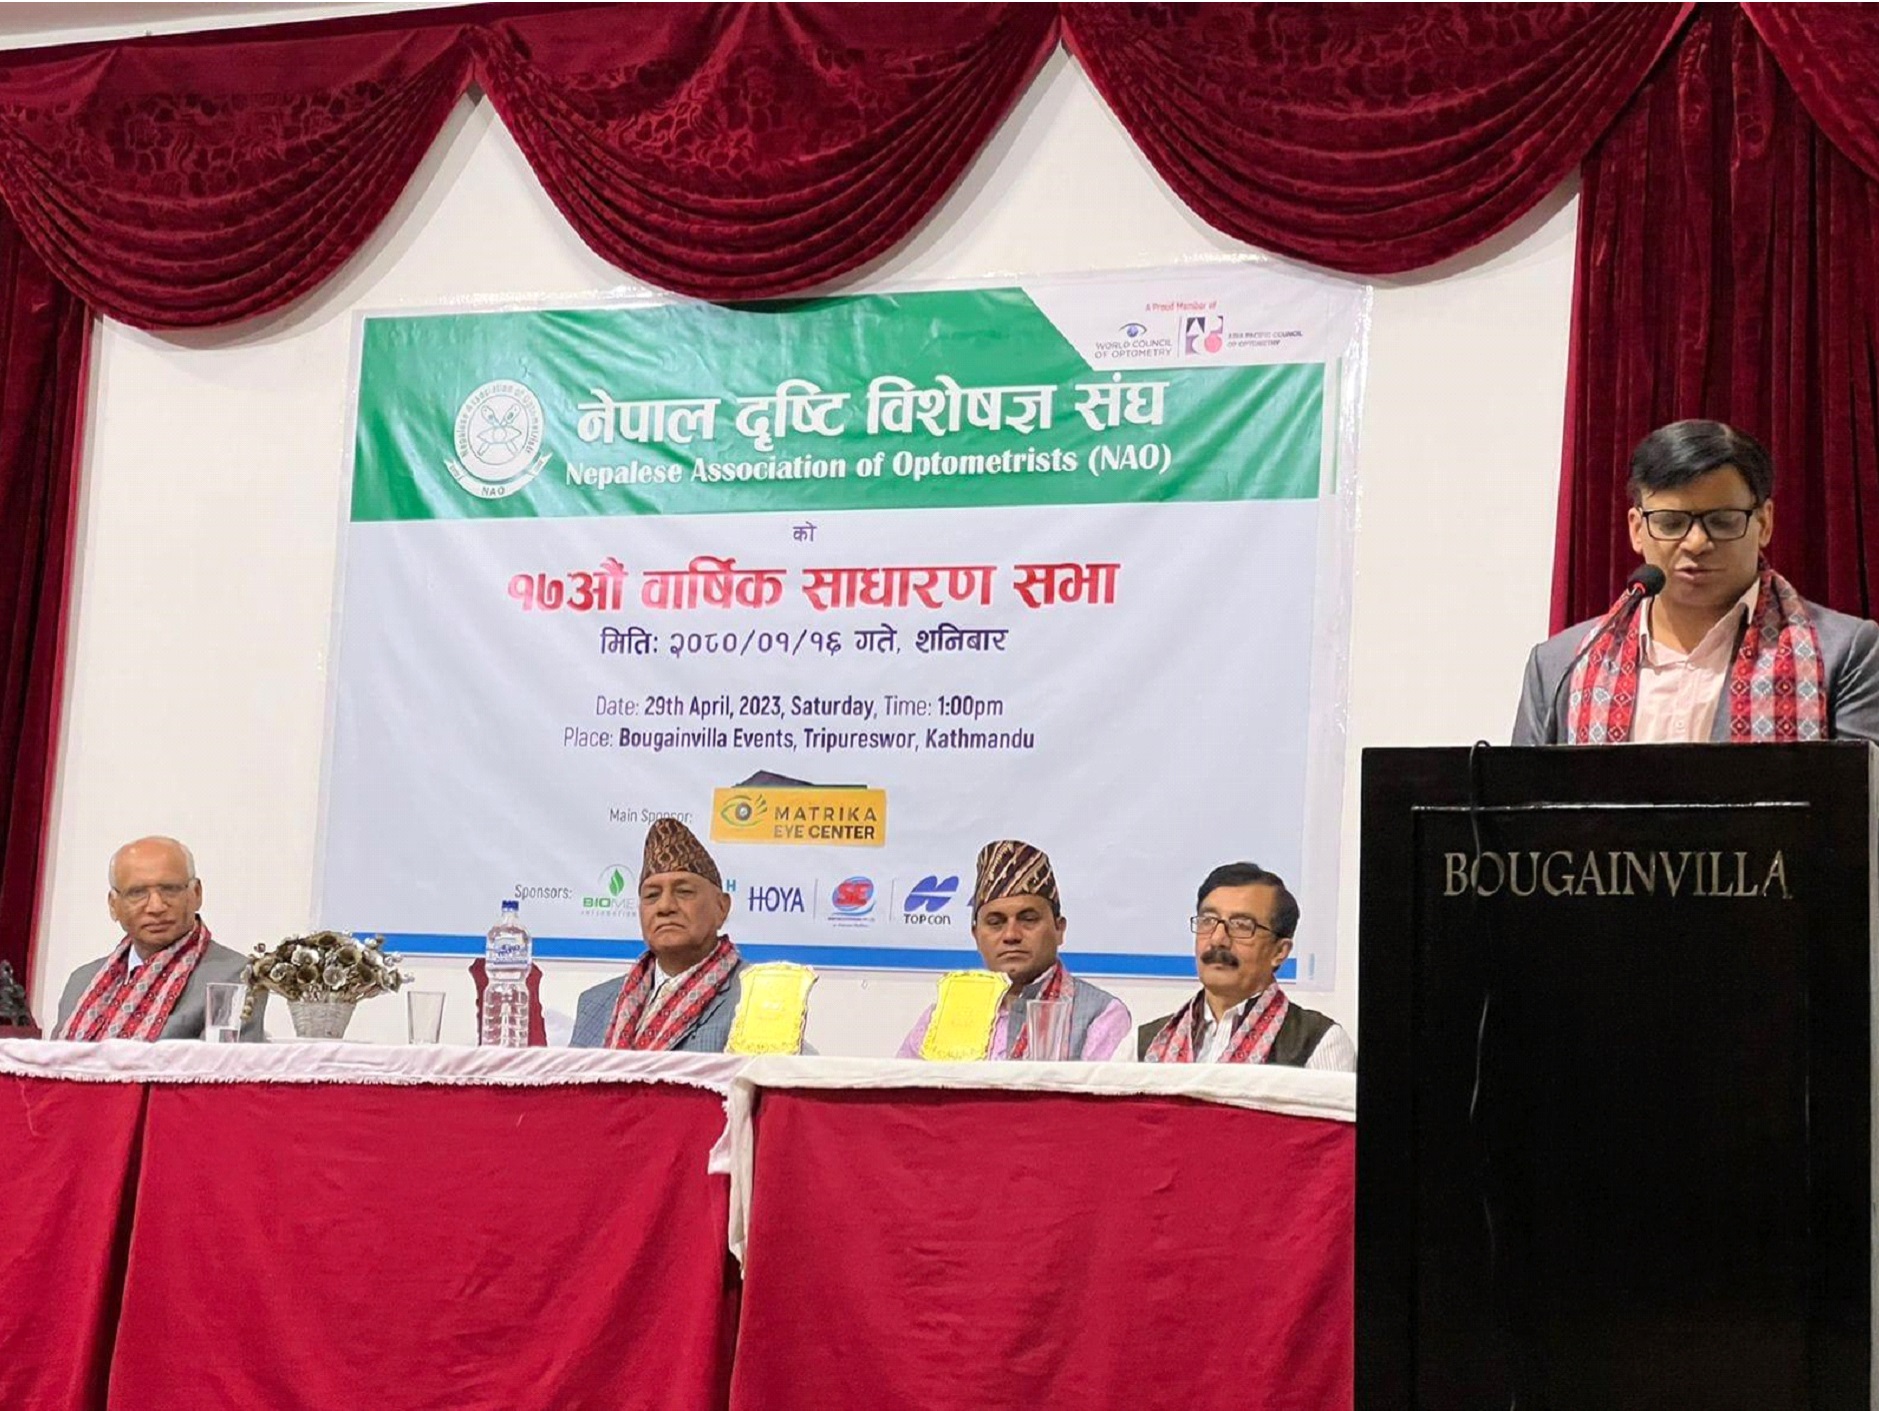 Nepalese Association of Optometrist organized its 15th Annual General Meeting